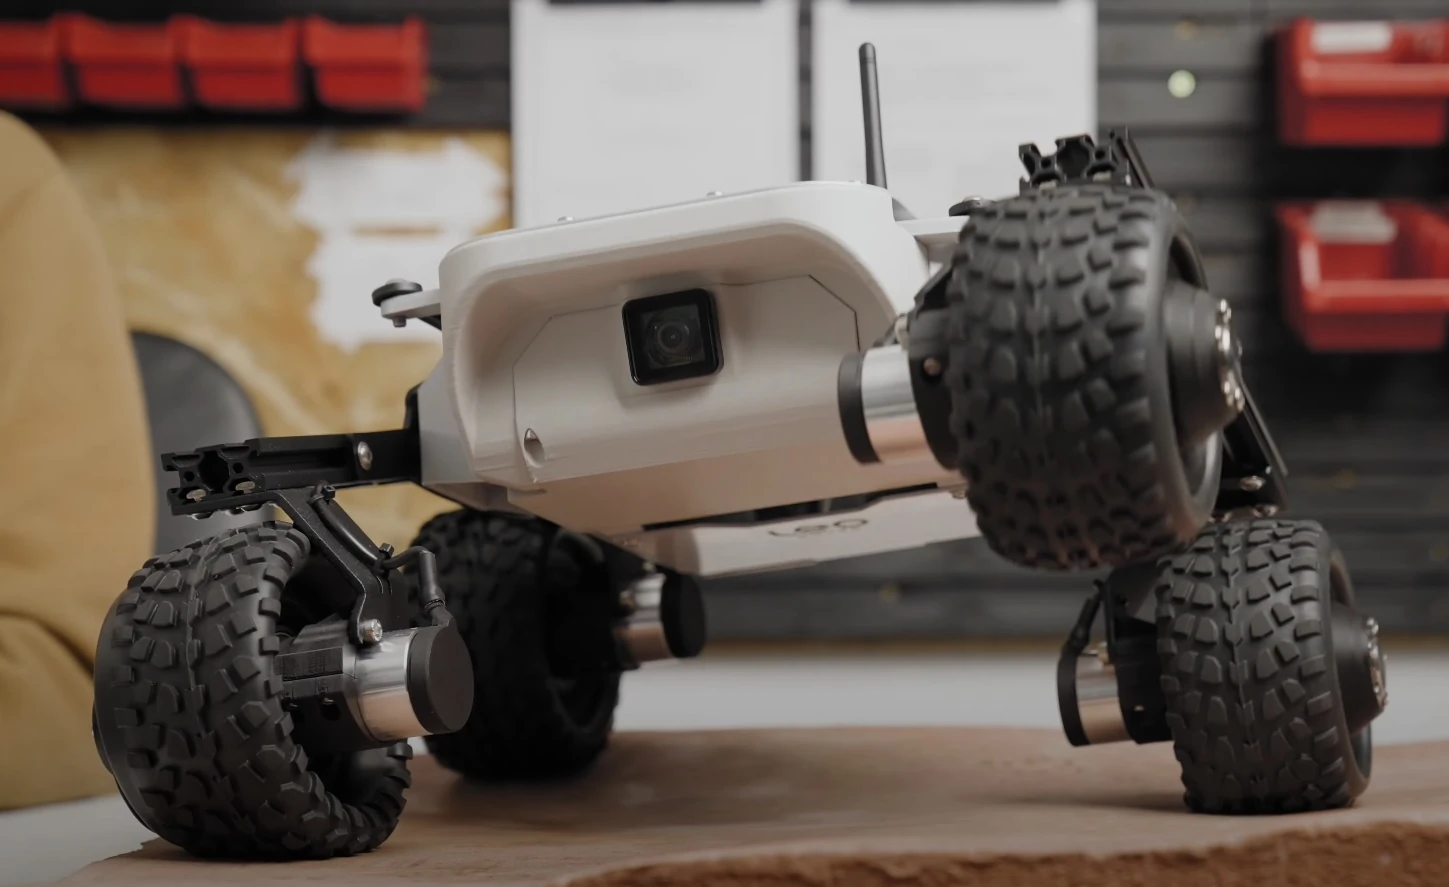 Leo Rover lifting one of its wheels